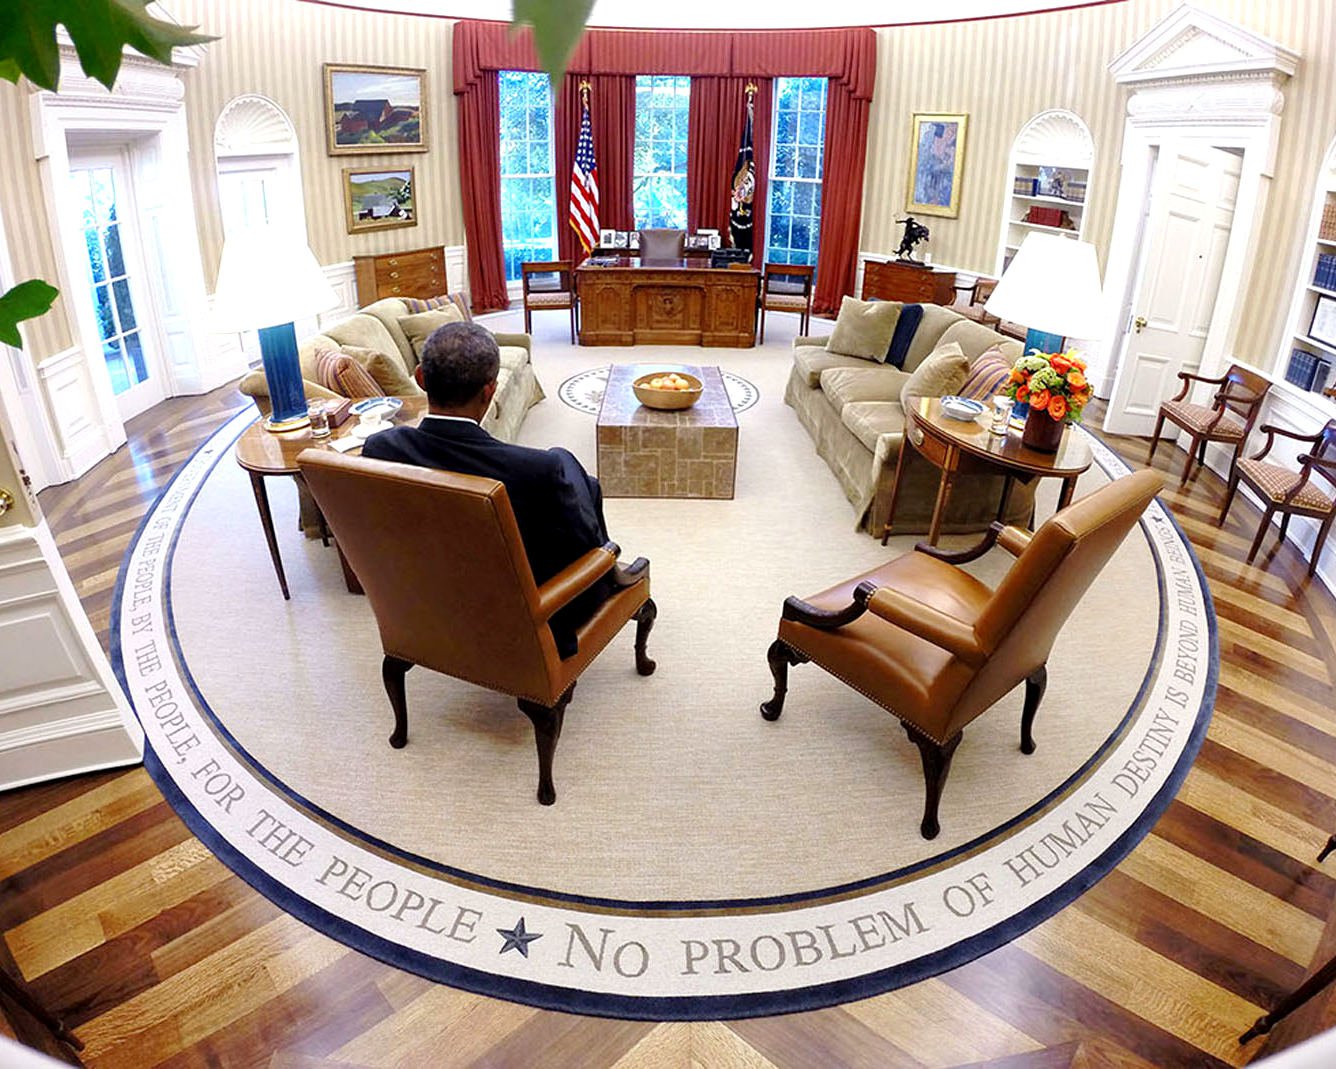 Barack obama reads briefing material in the oval office - 8X10 photo (ZZ-59...